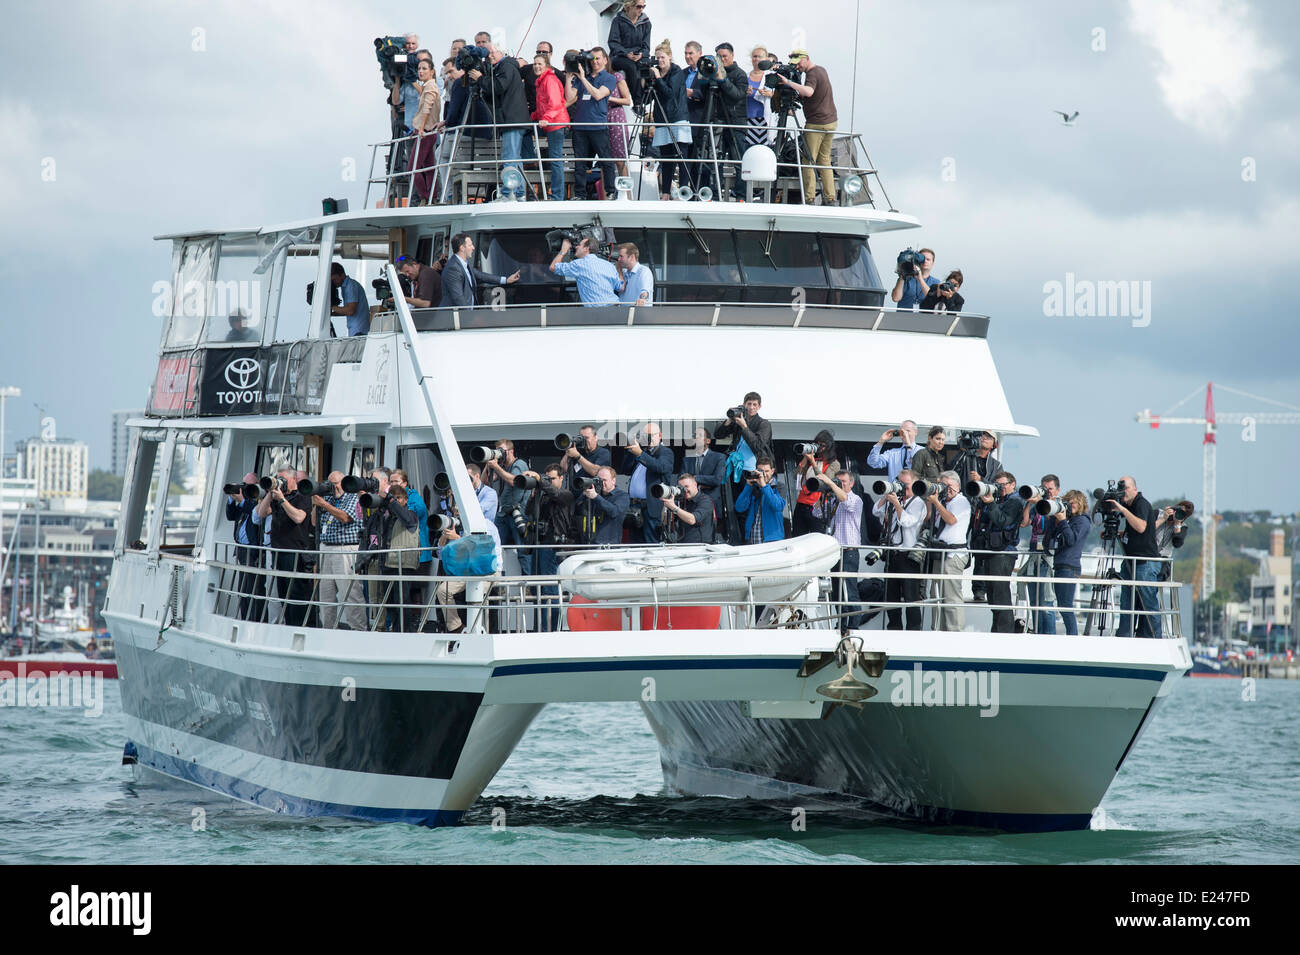 Photographers and TV crews crowd a catamaran tourist boat for a vantage point during the Duke and Duchess of Cambridge's visit Stock Photo